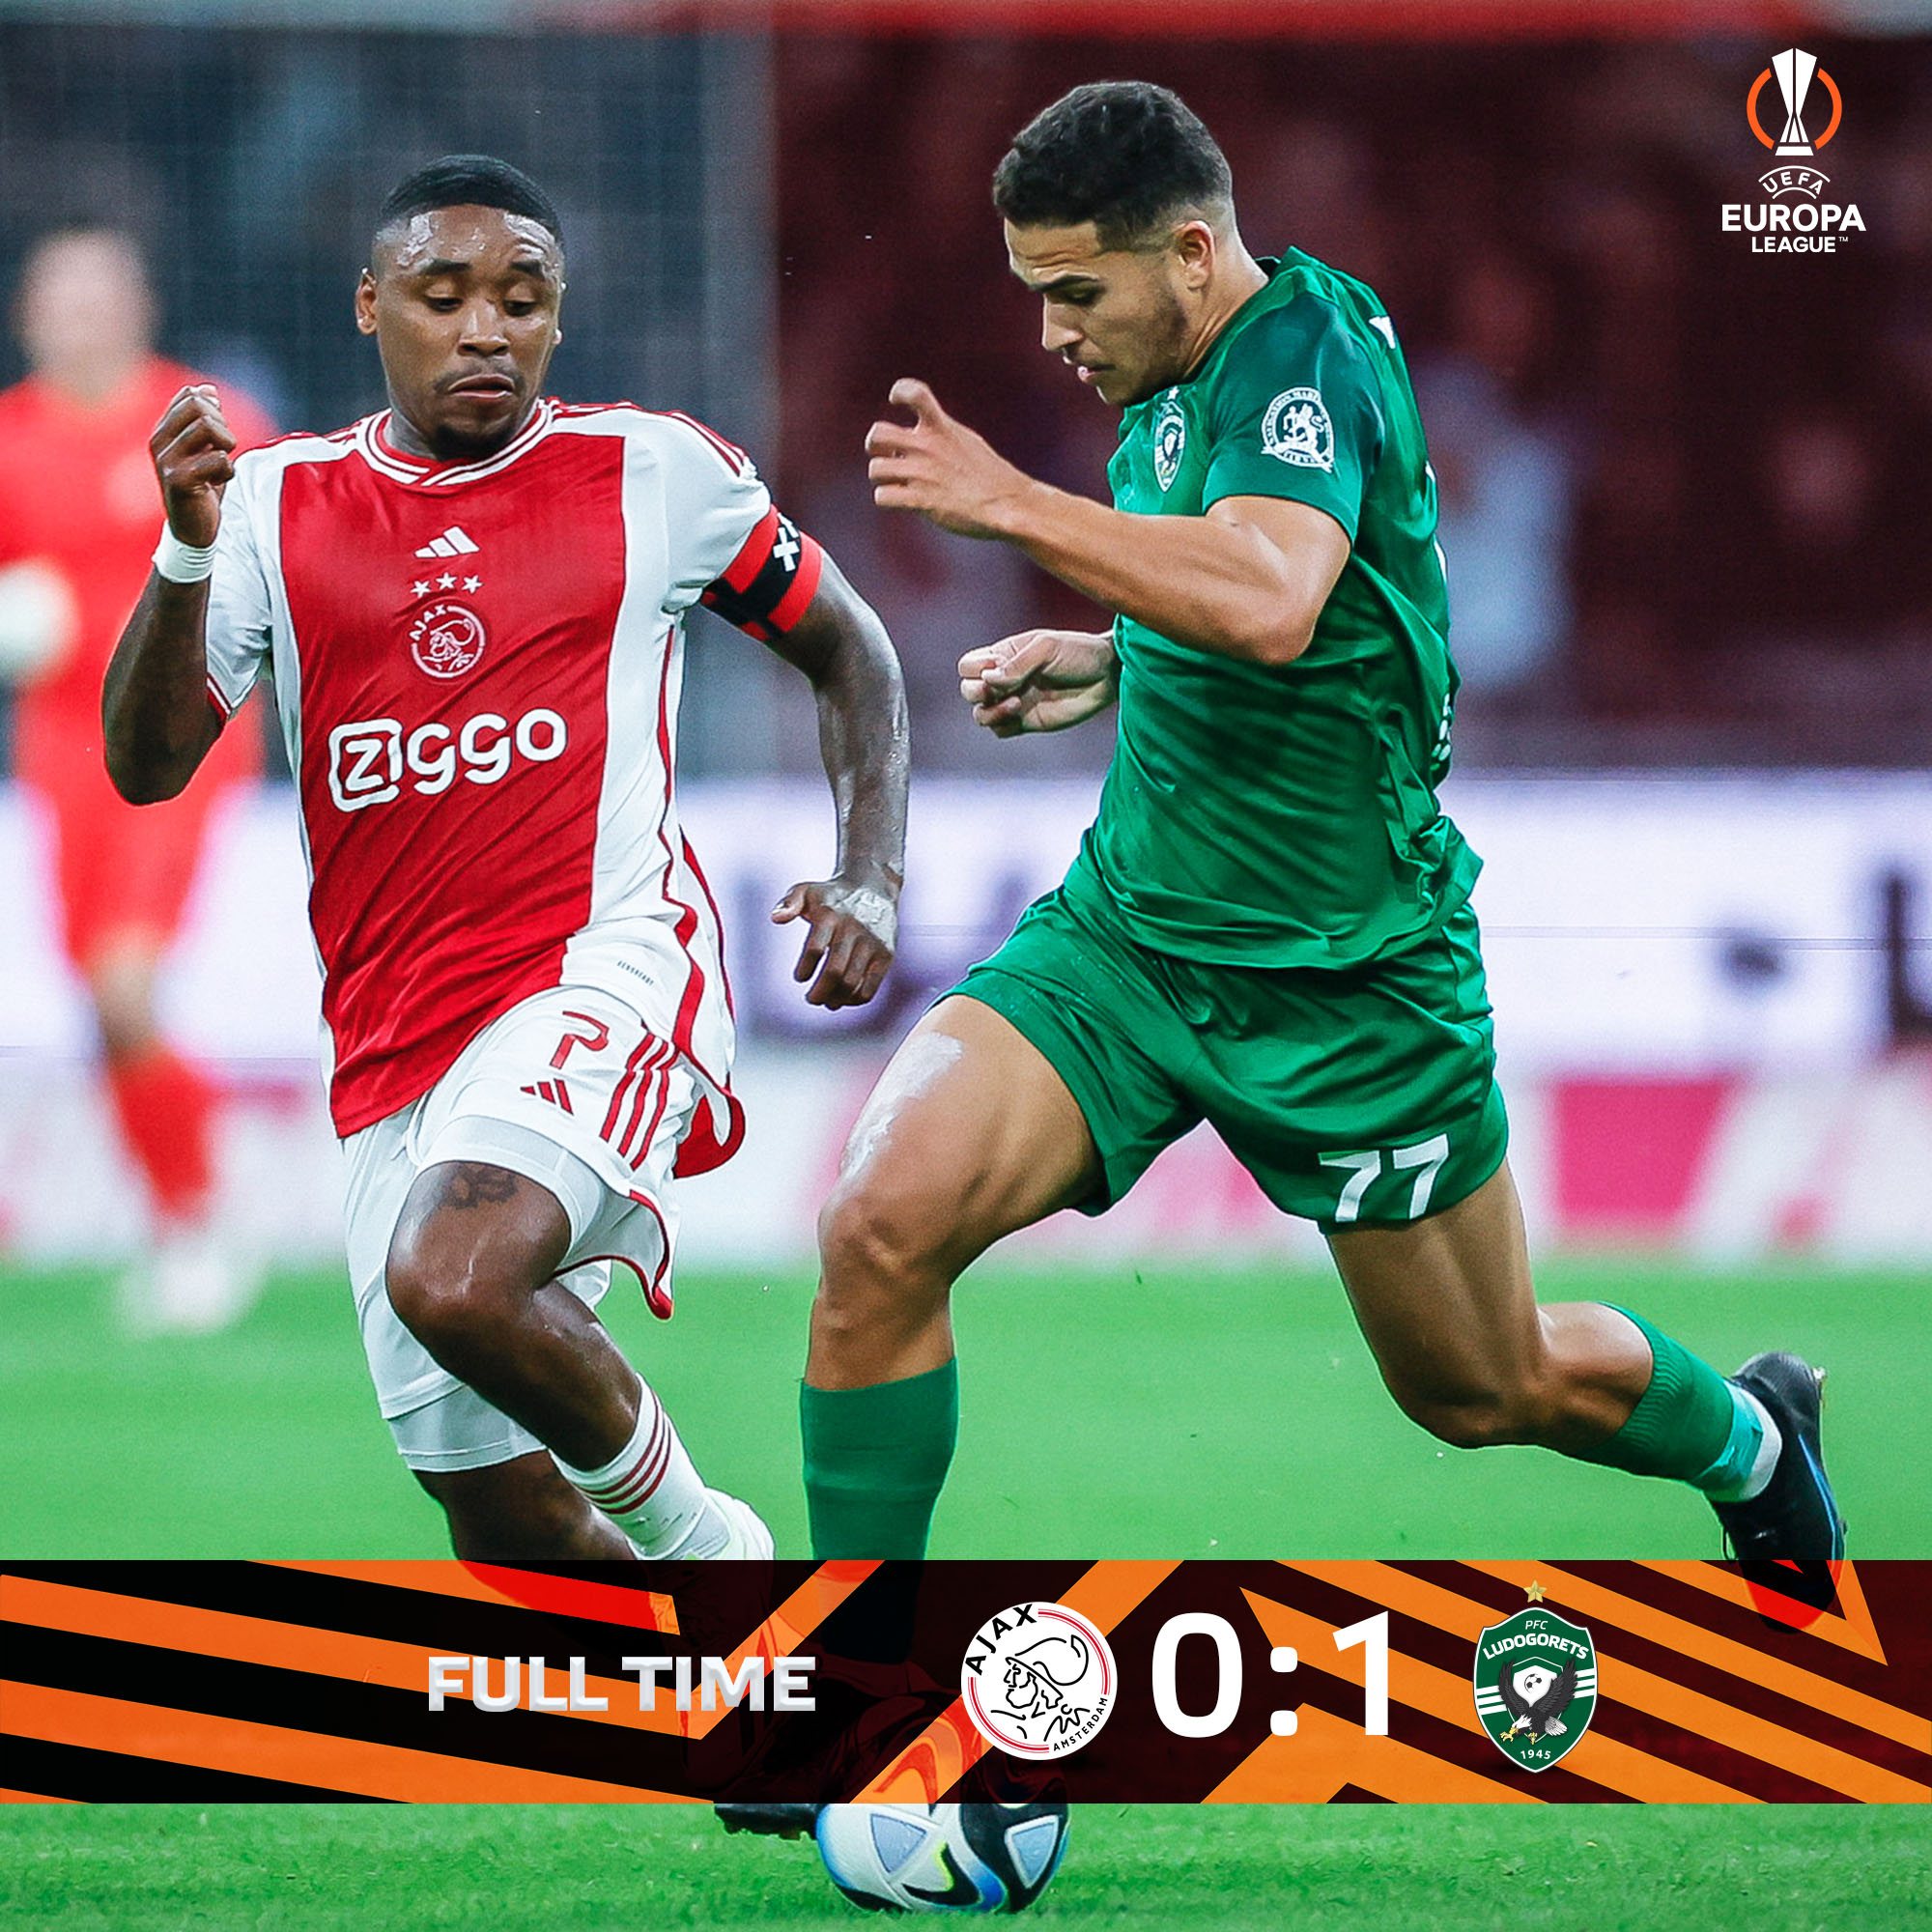 PFC Ludogorets 1945 on X: 💪 Full time. Victory for Ludogorets